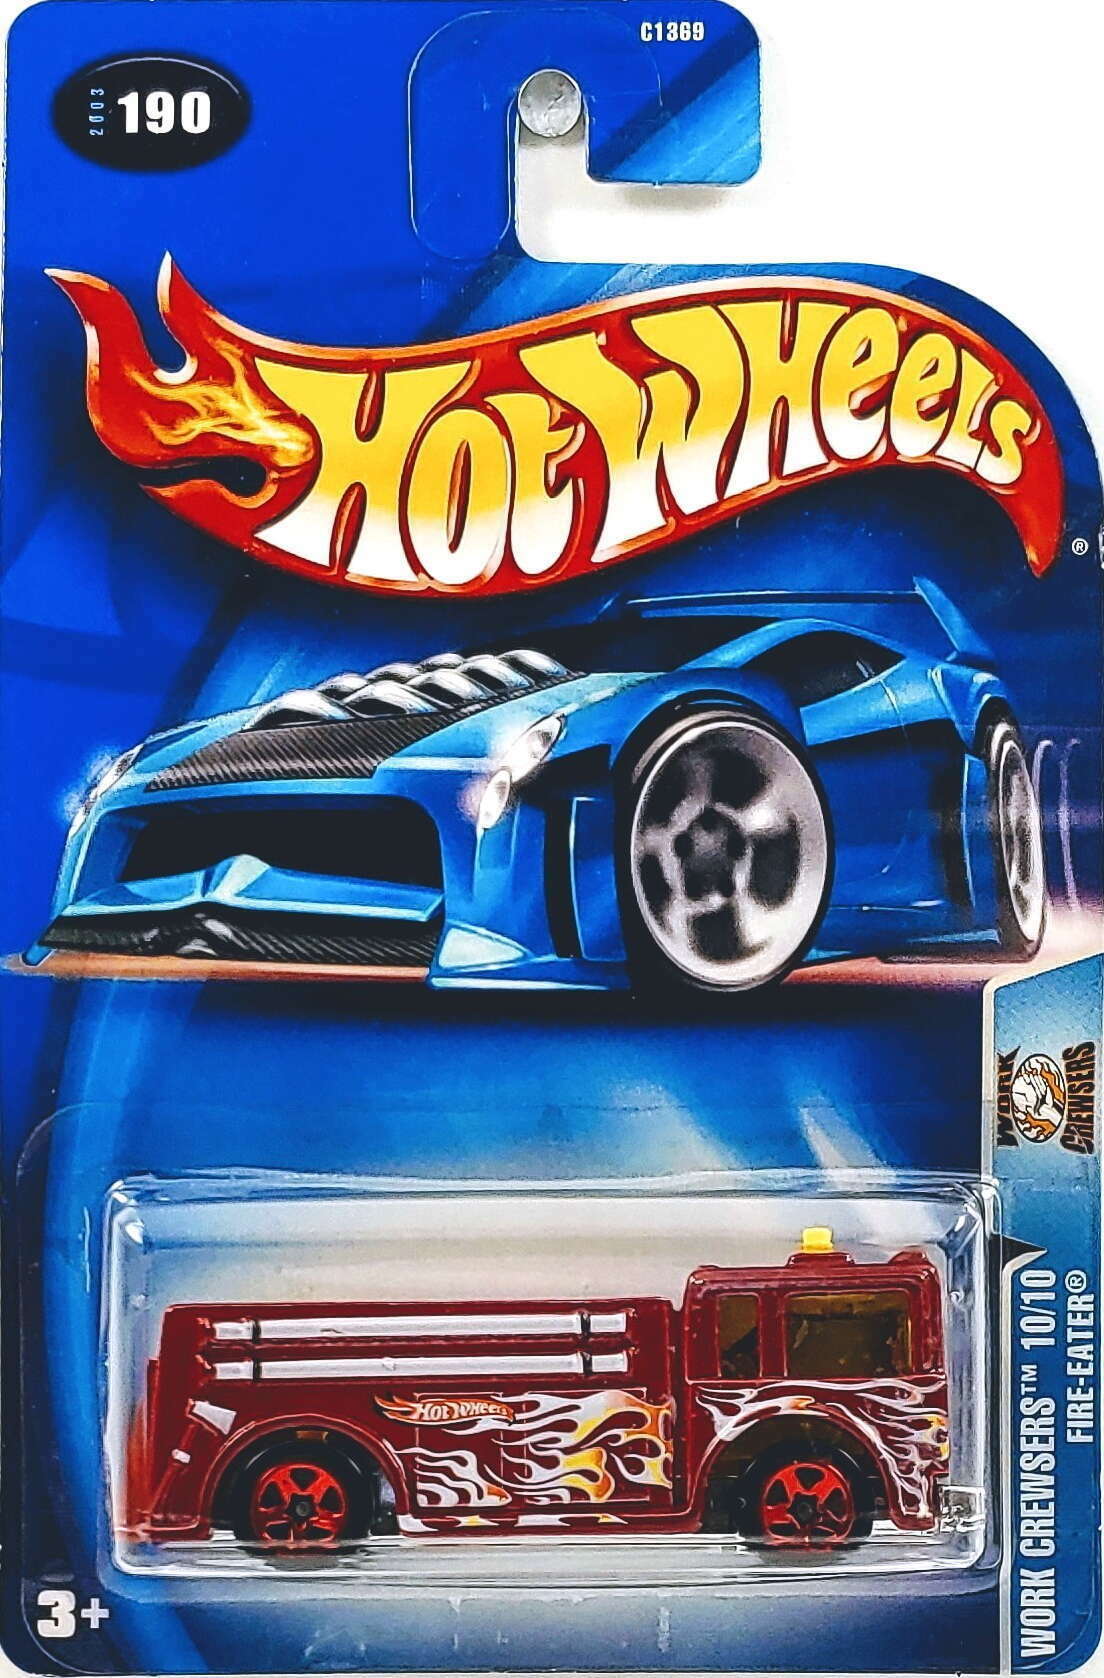 Hot Wheels 2003 - Collector # 190/220 - Work Crewsers 10/10 - Fire-Eater - Red - Red Chrome 5 Spoke Wheels - USA